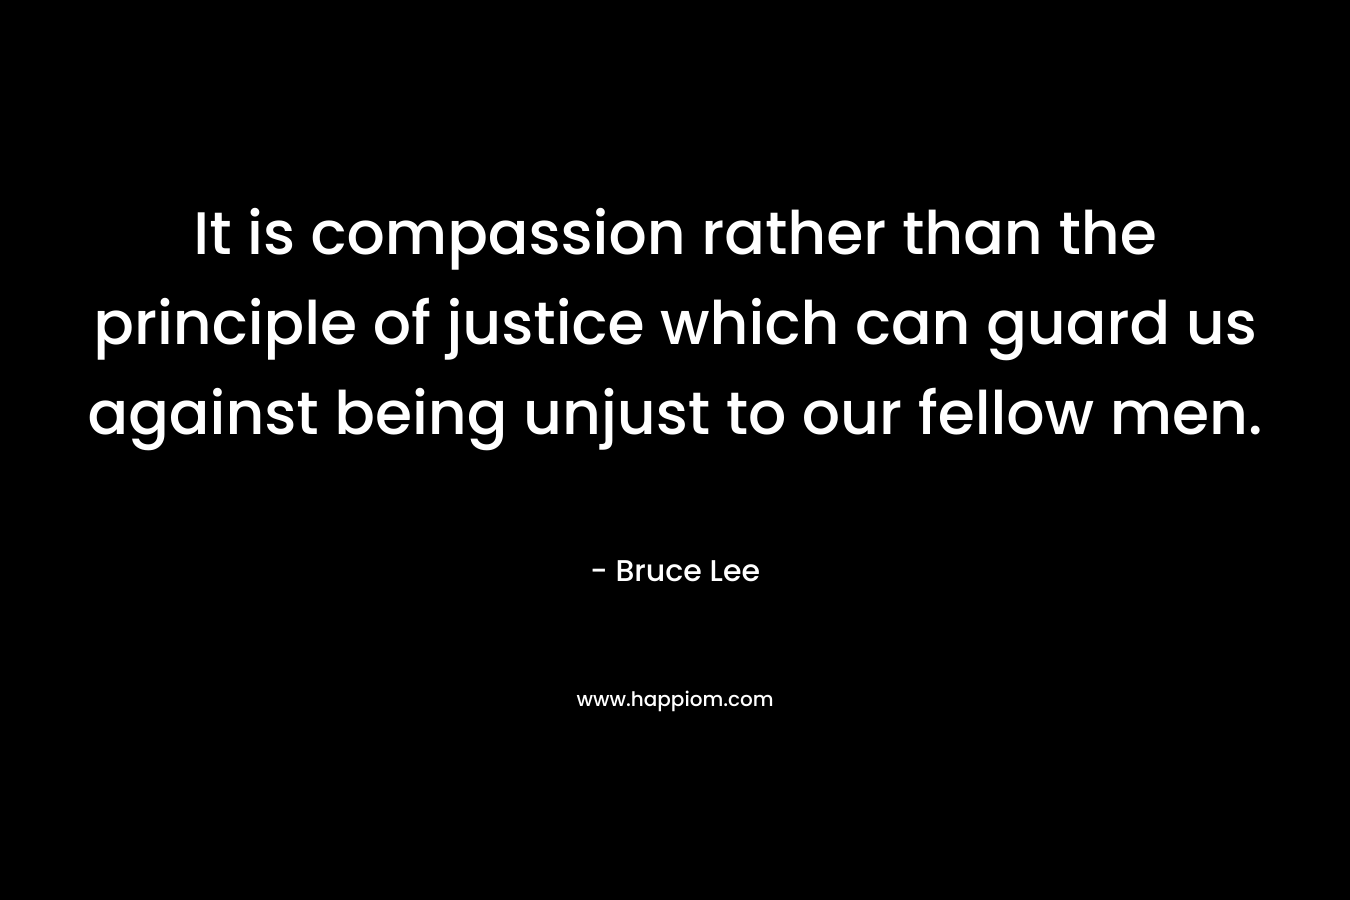 It is compassion rather than the principle of justice which can guard us against being unjust to our fellow men. – Bruce Lee